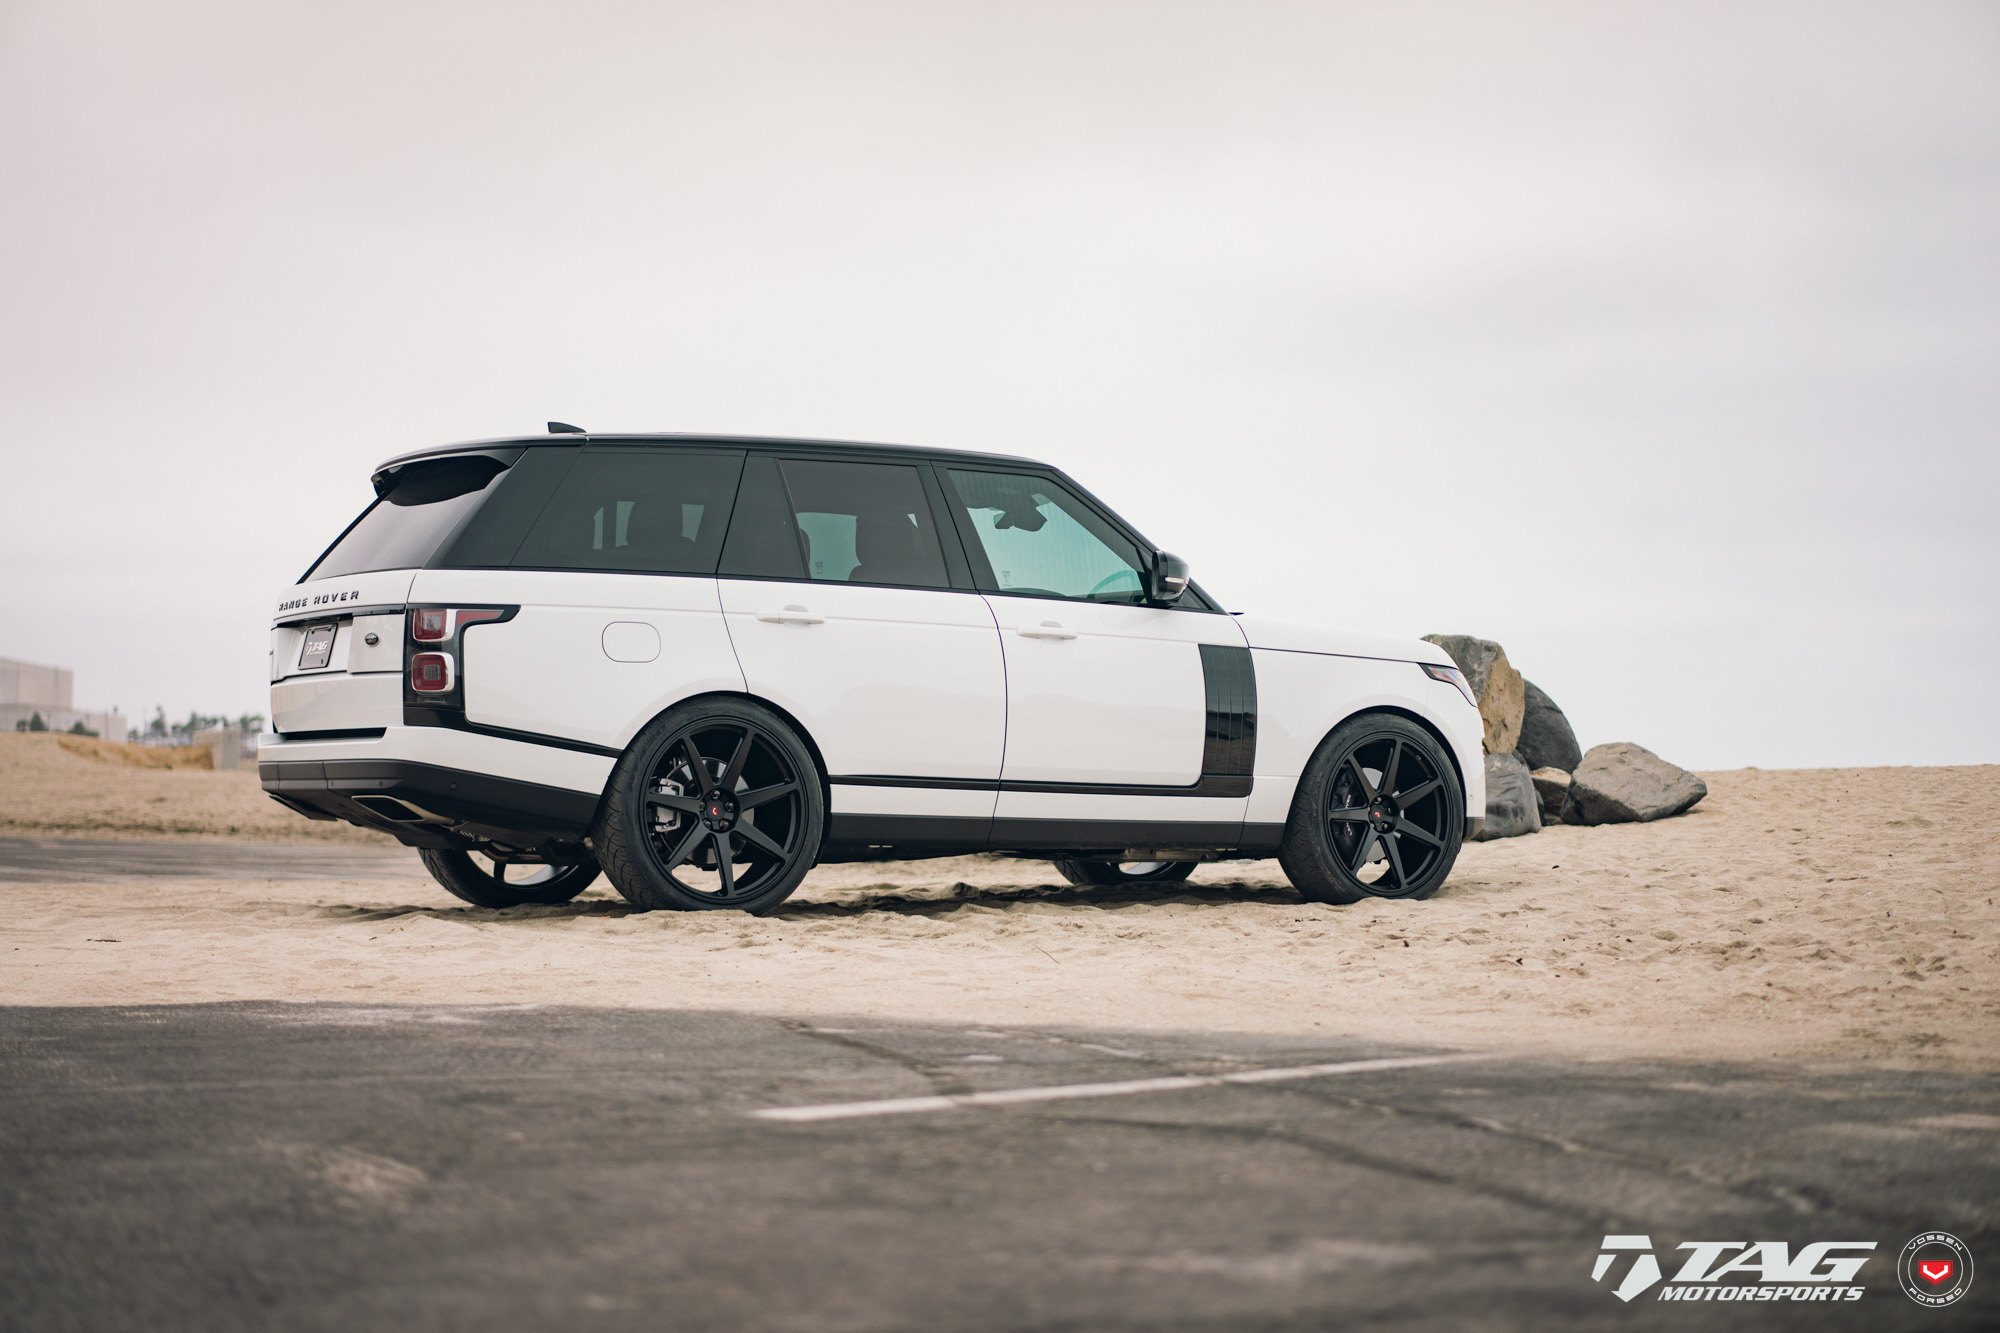 Aftermarket Red Taillights on White Range Rover - Photo by Vossen